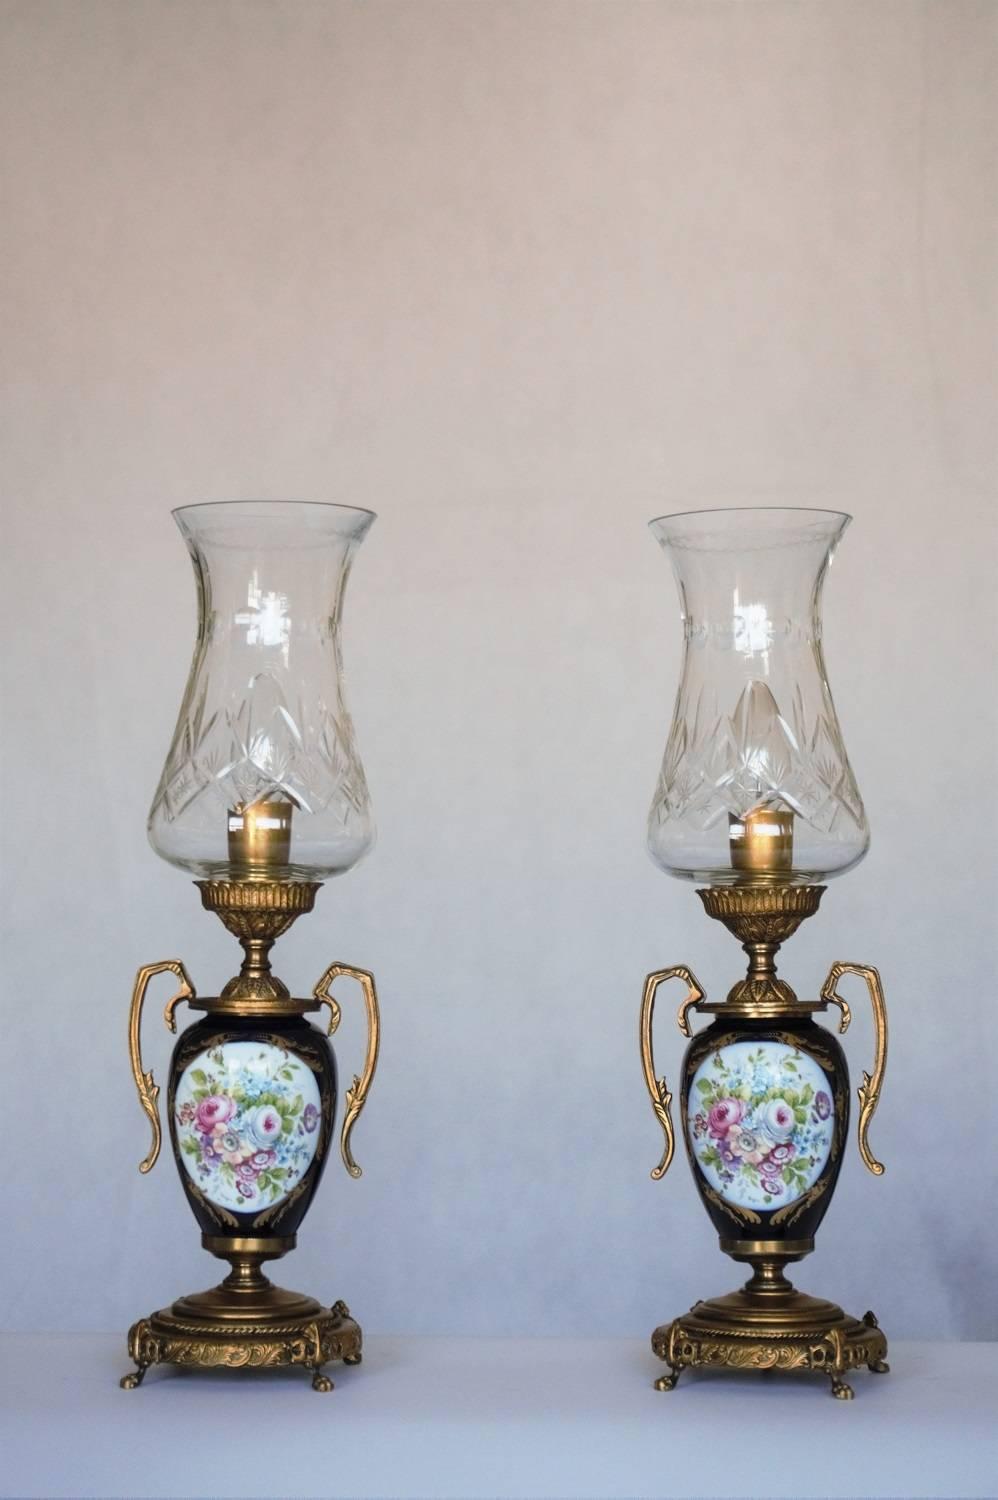 Pair of French cobalt blue porcelain and brass vase table lamps with hand-painted flowers and gilded decor, tall cut crystal lamp shades, circa 1950 1960.
Porcelain manufacture: ACE Decor De Paris / with signature of the painter

Very good